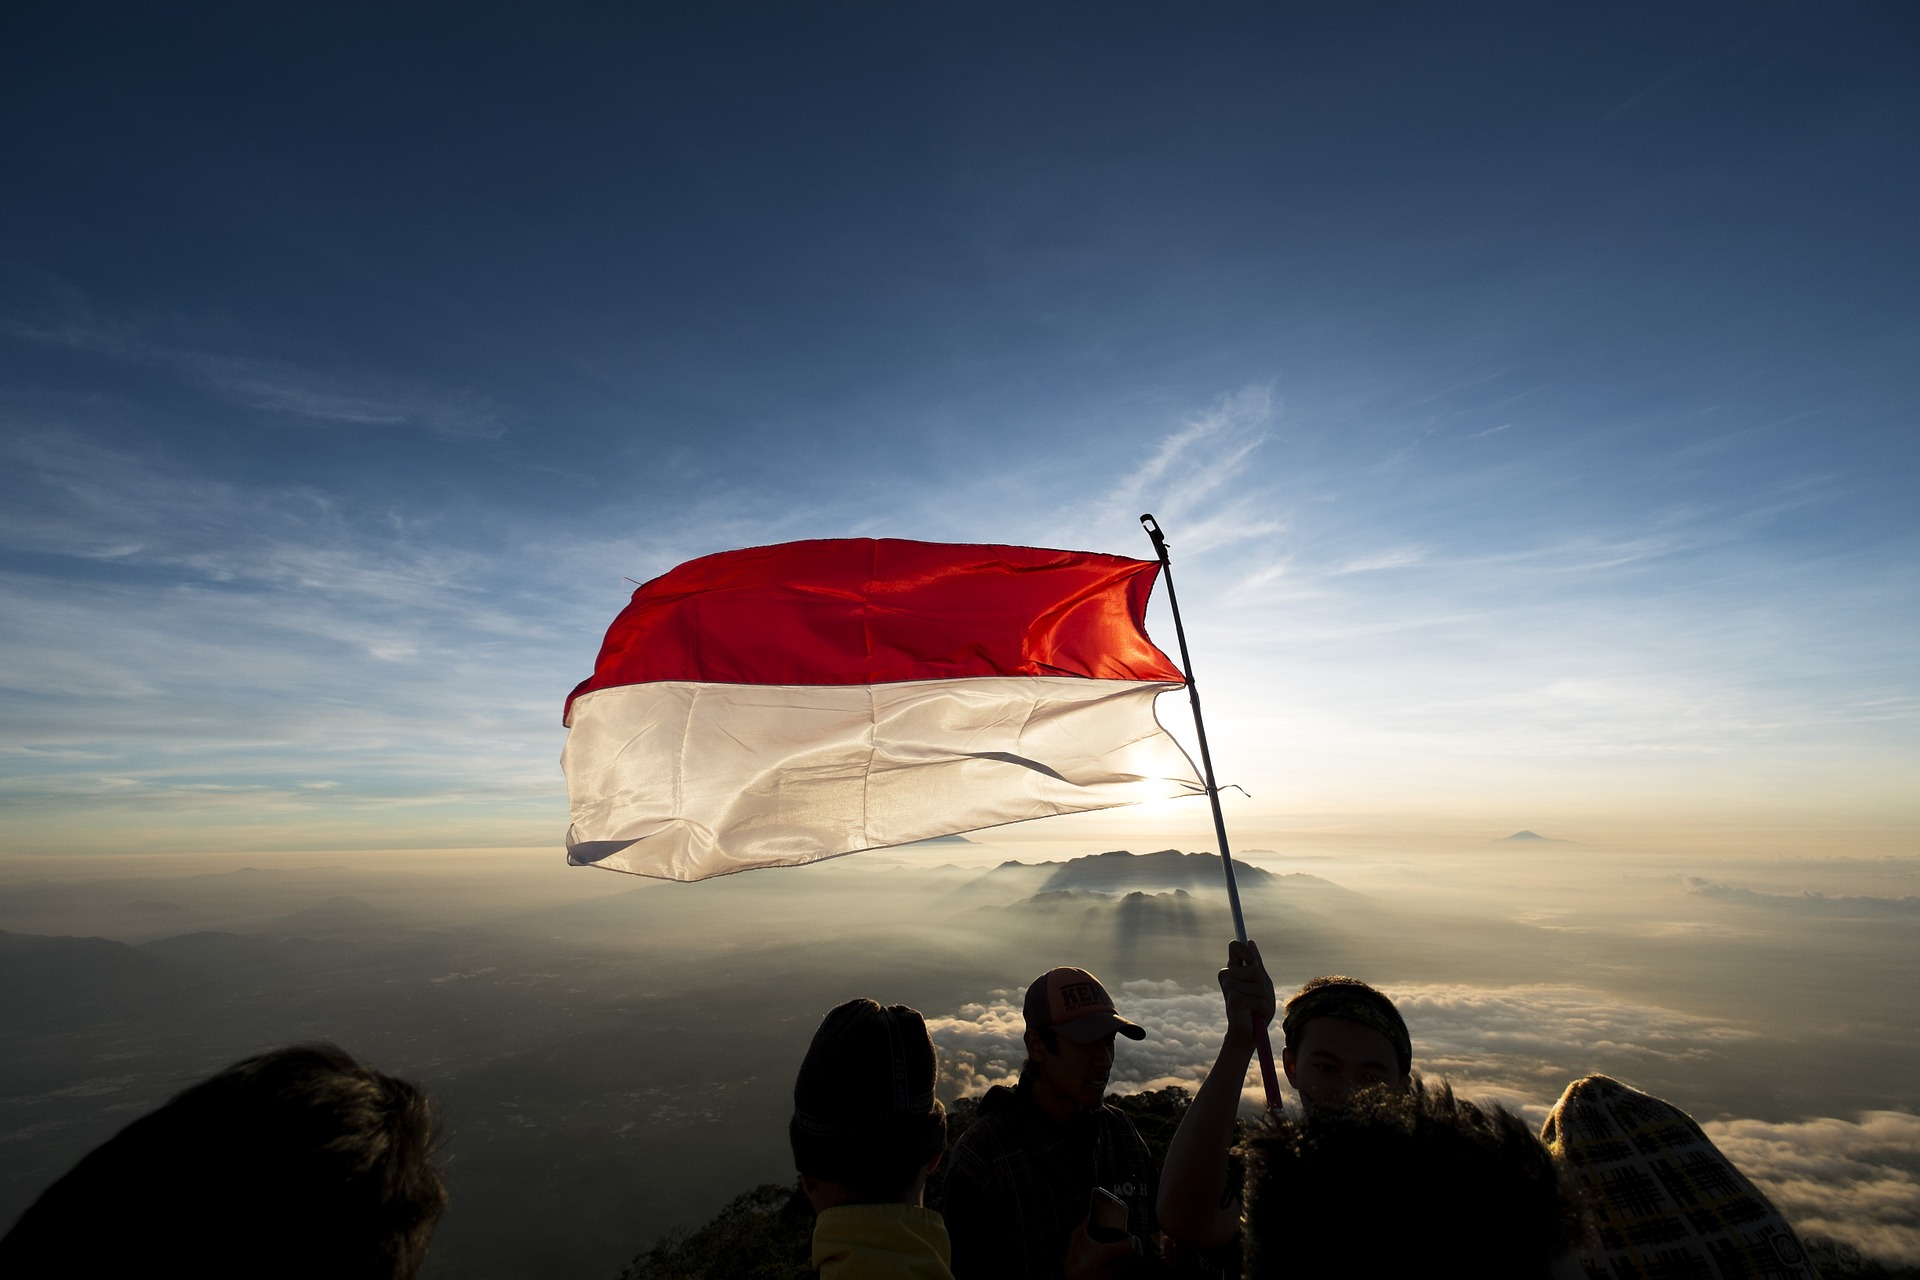 Meet 40 of Indonesia’s top startup founders